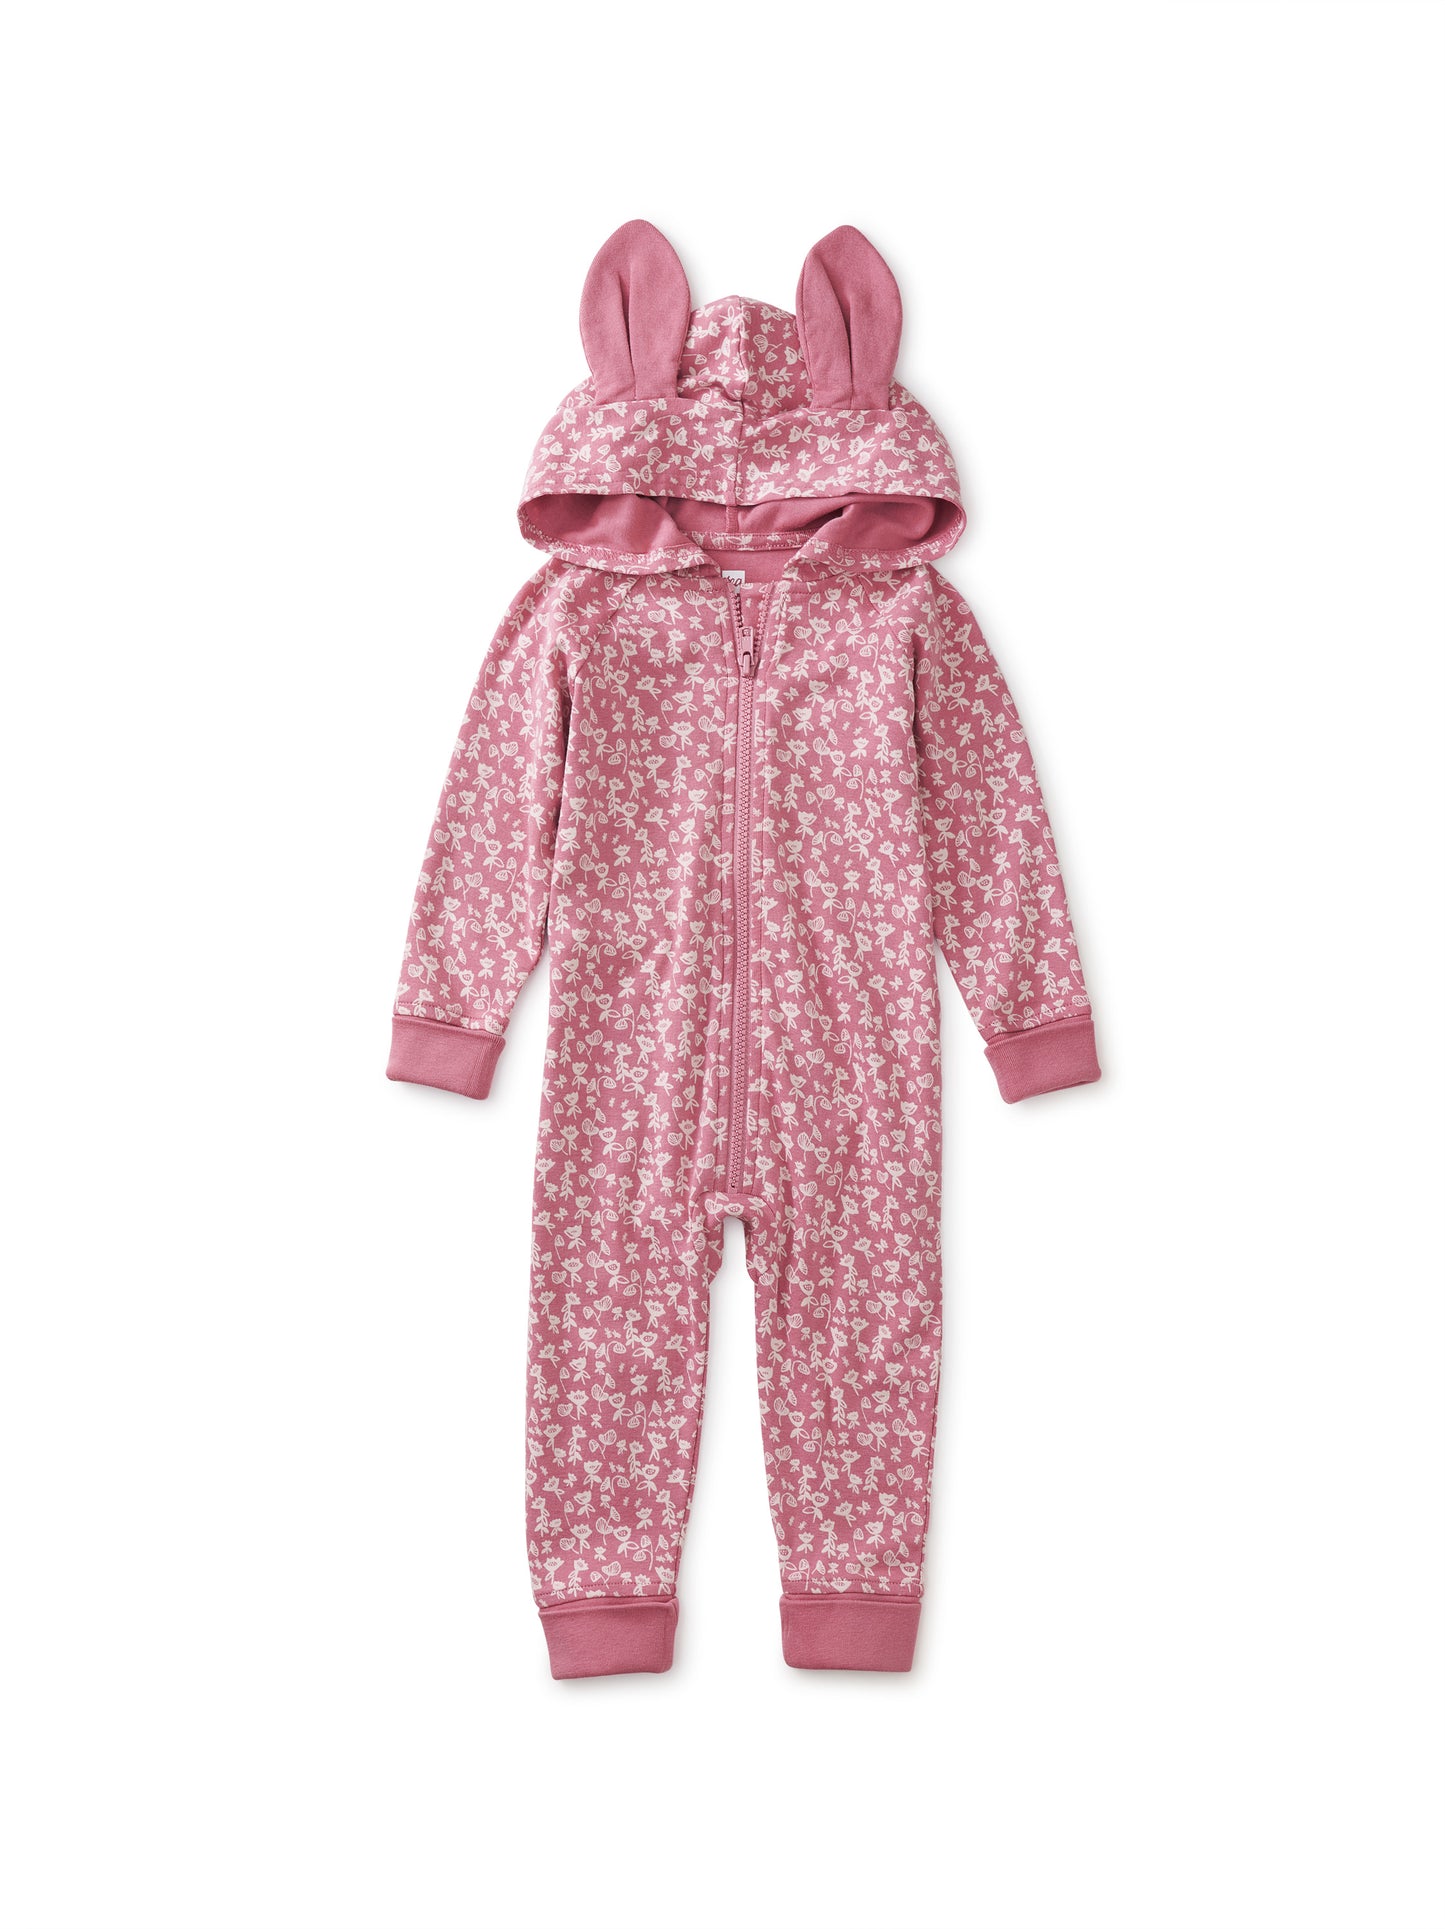 Hooded Baby Romper With Ears - Tiny Lotus